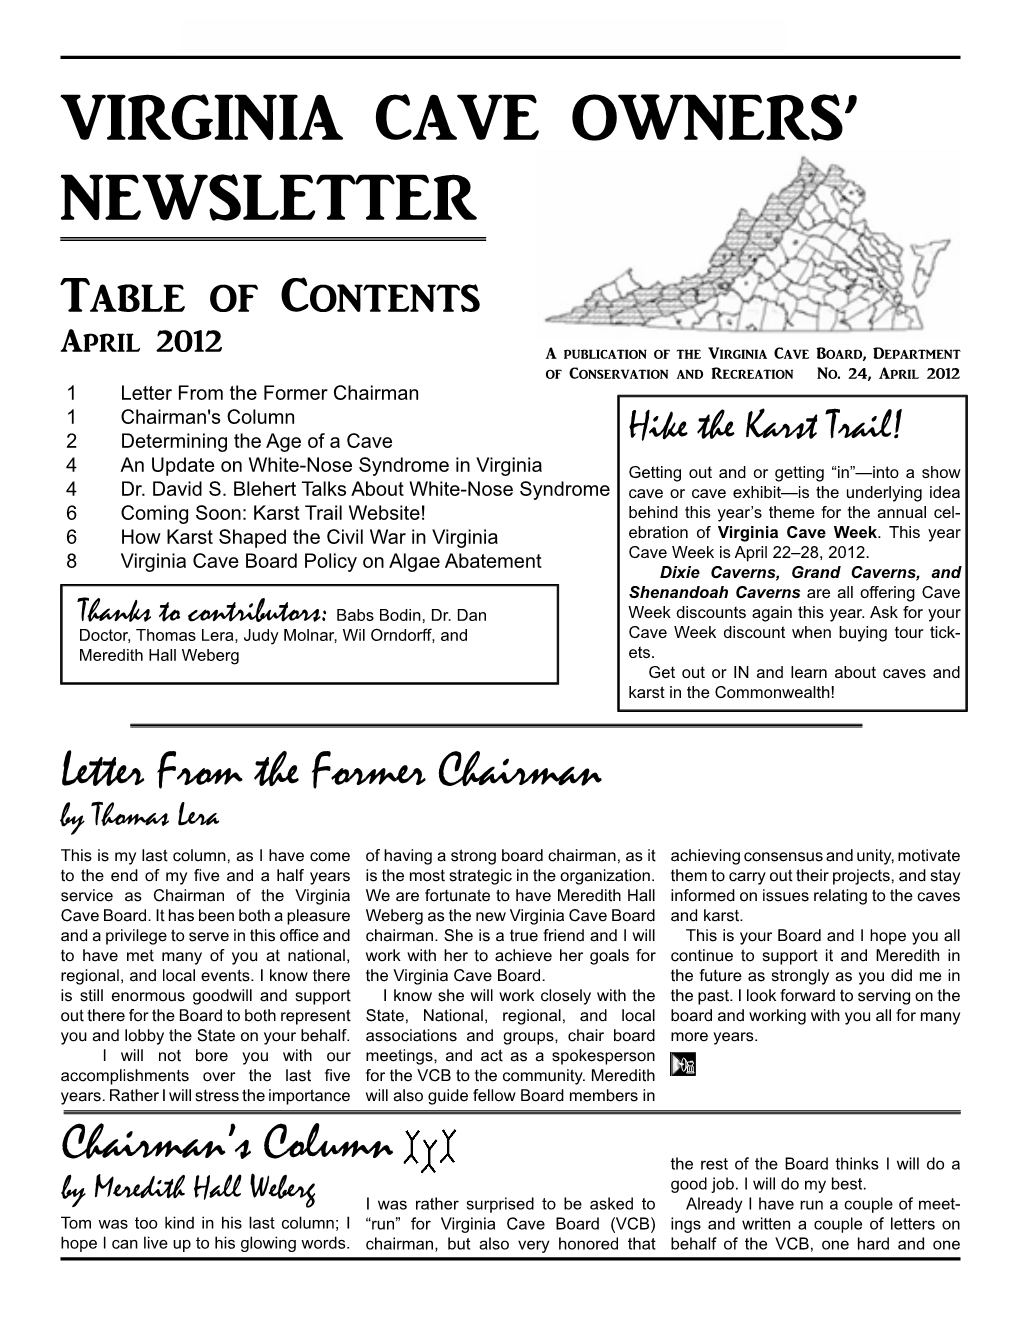 Virginia Cave Owners' Newsletter April 2012  VIRGINIA CAVE OWNERS’ NEWSLETTER Table of Contents